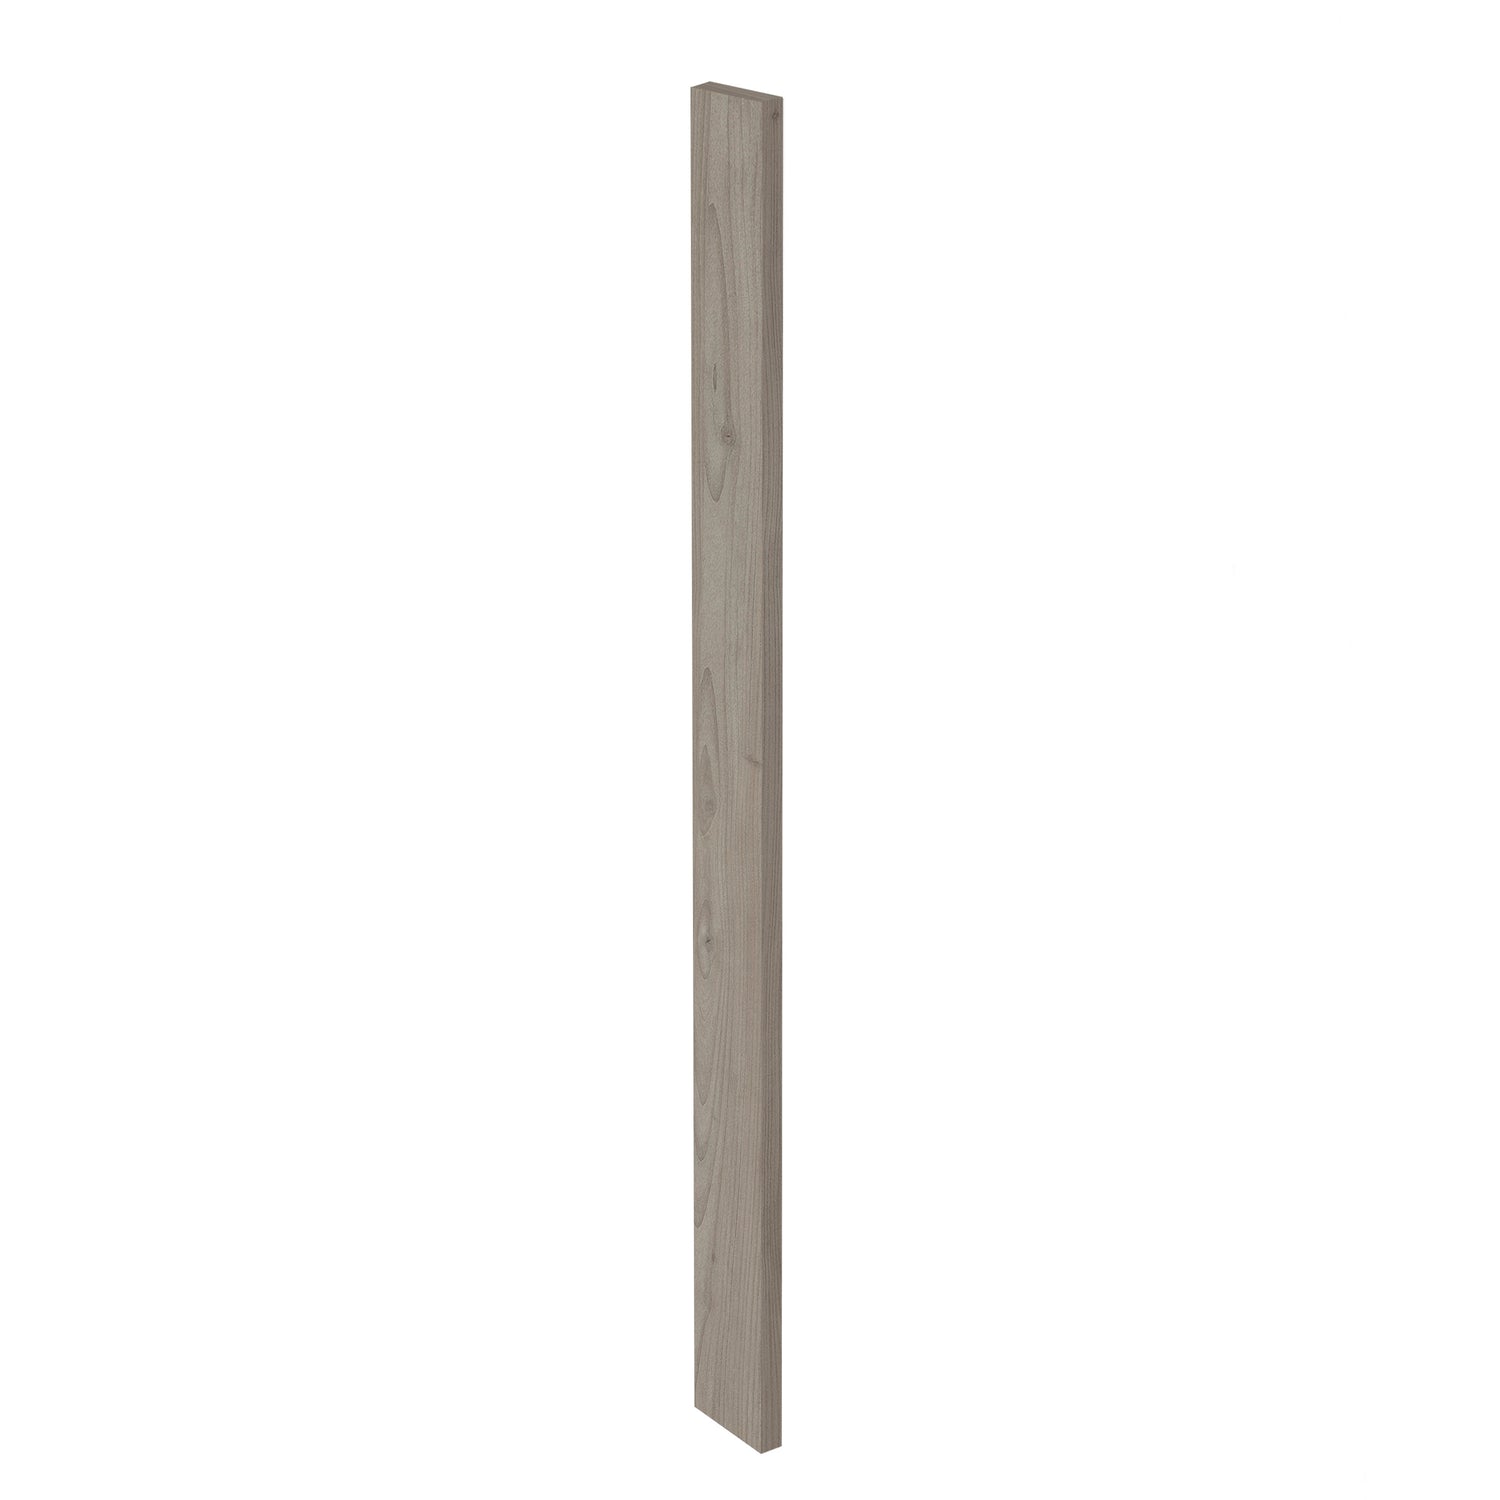 Grey Nordic Slab Style Kitchen Cabinet Filler (3 in W x 0.75 in D x 34.5 in H)